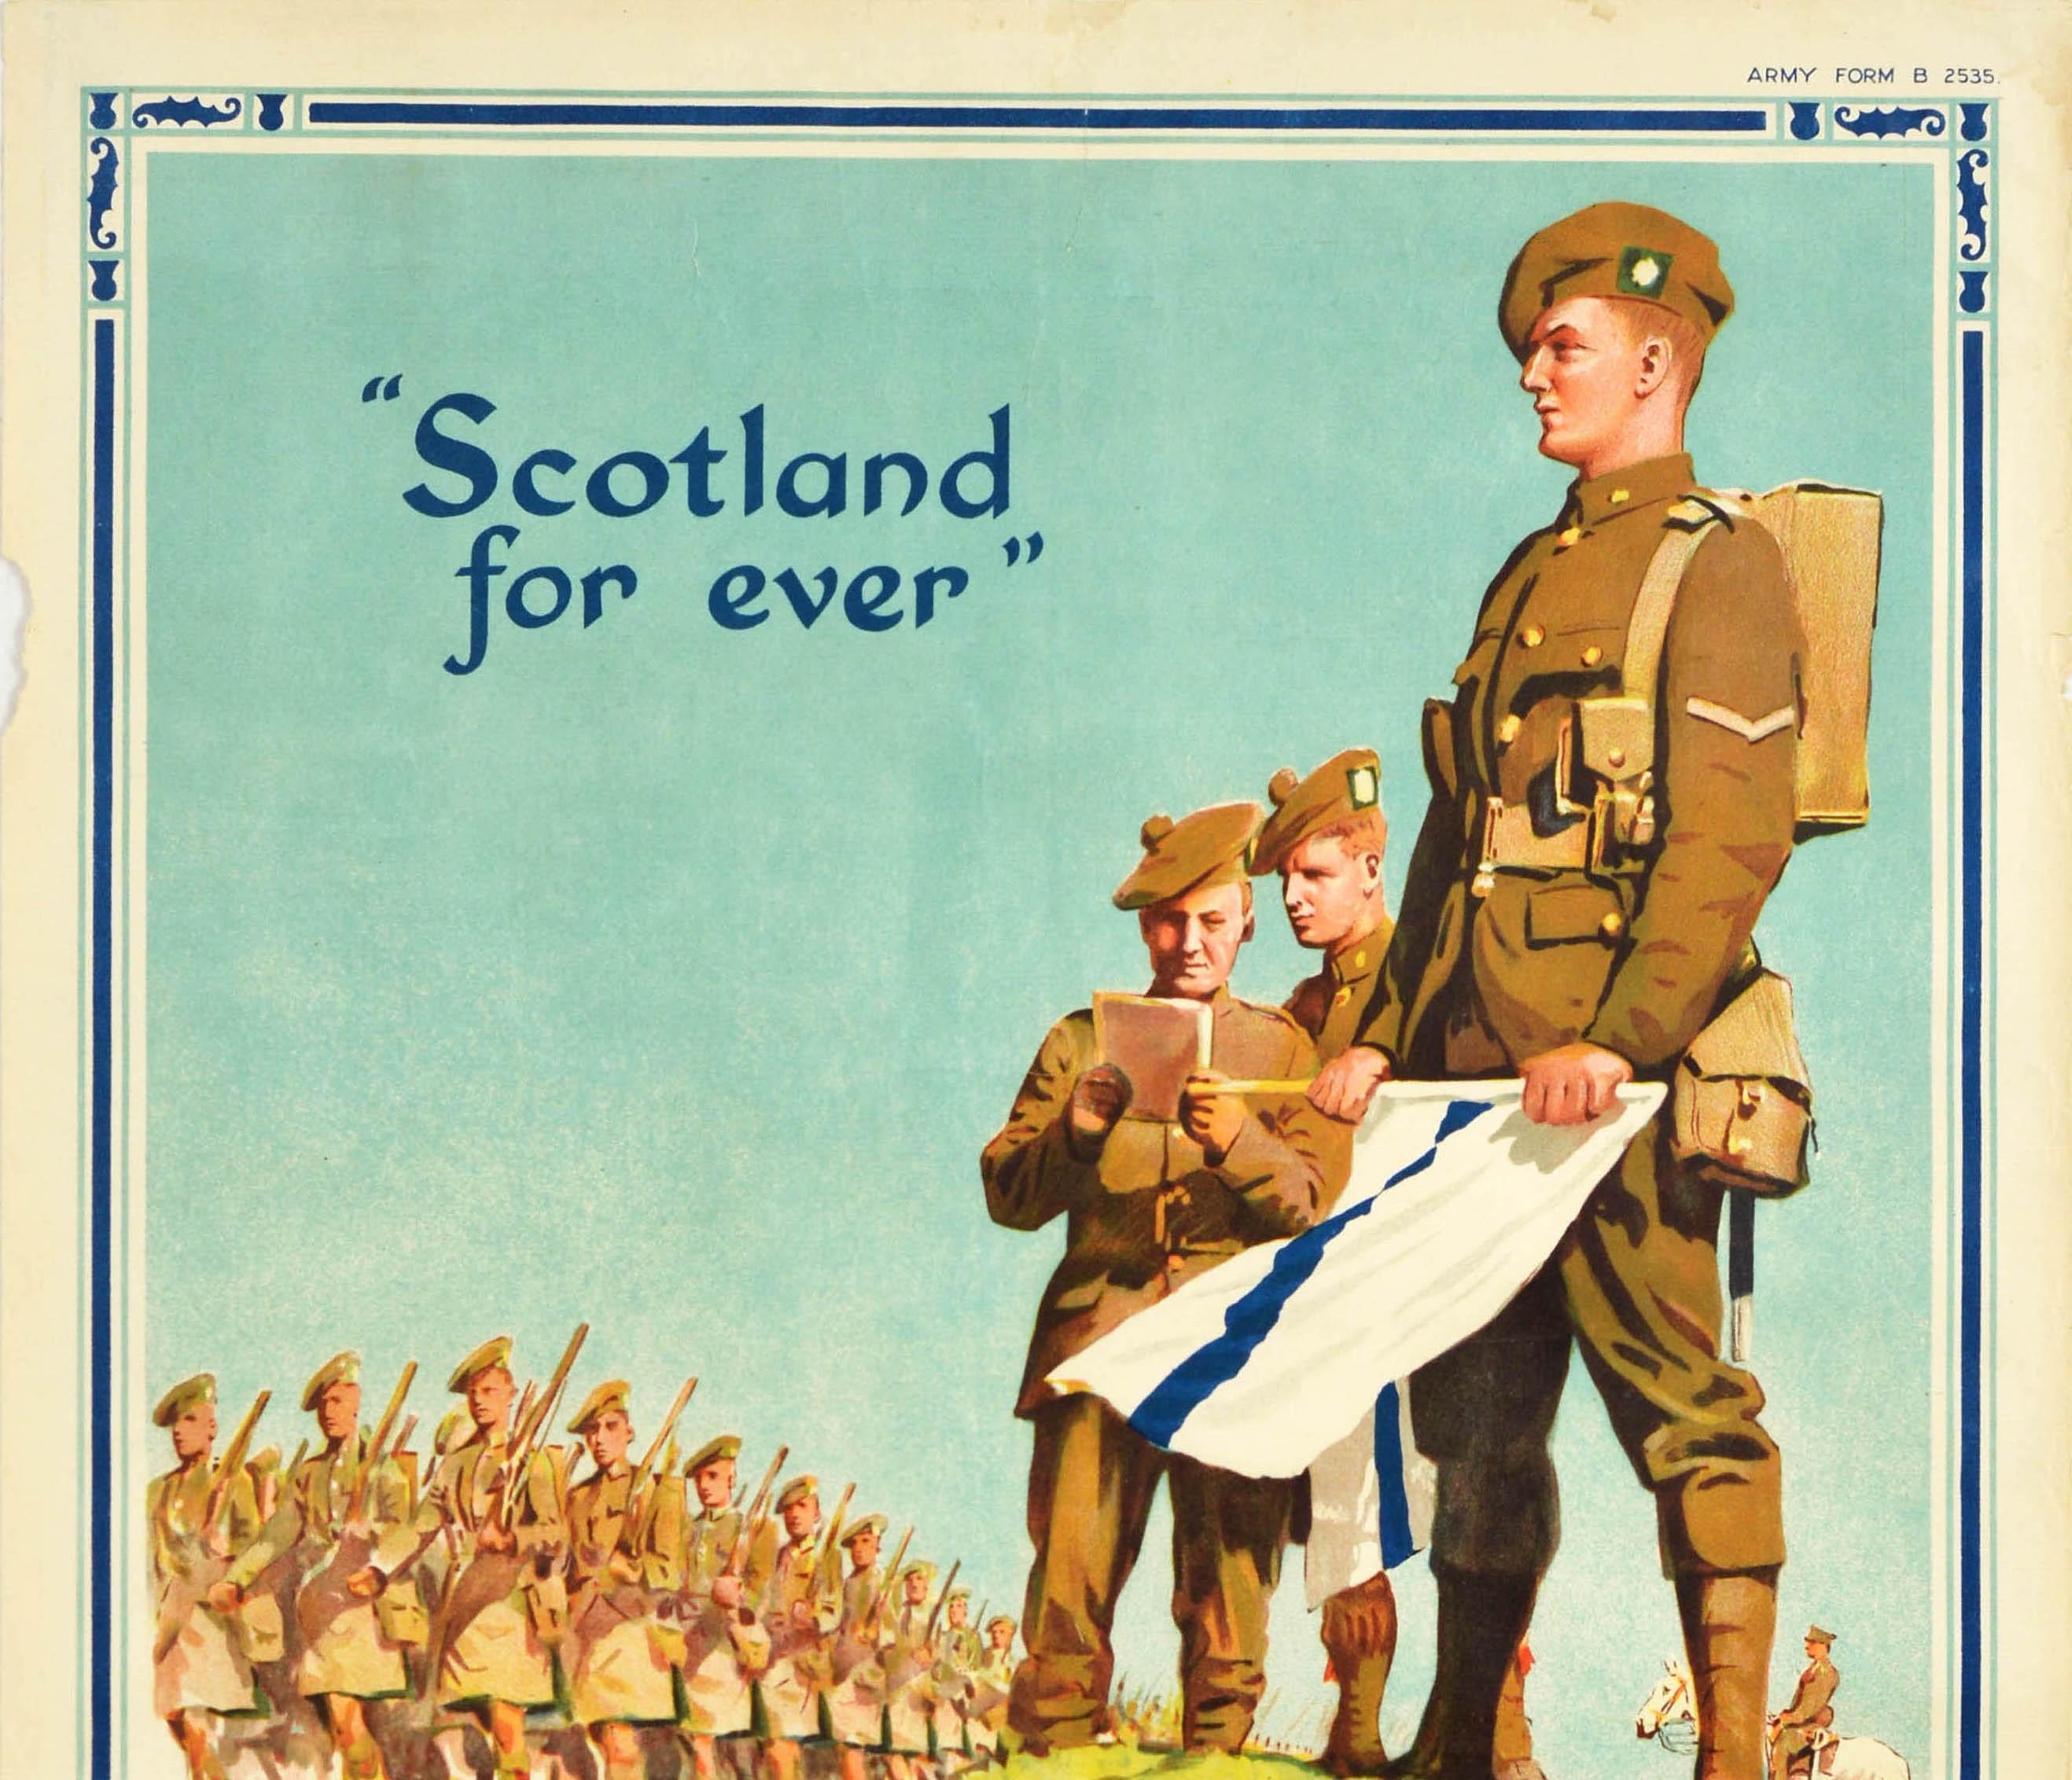 Original Vintage Military Army Poster Join A Scottish Regiment Scotland For Ever - Print by Tom Curr